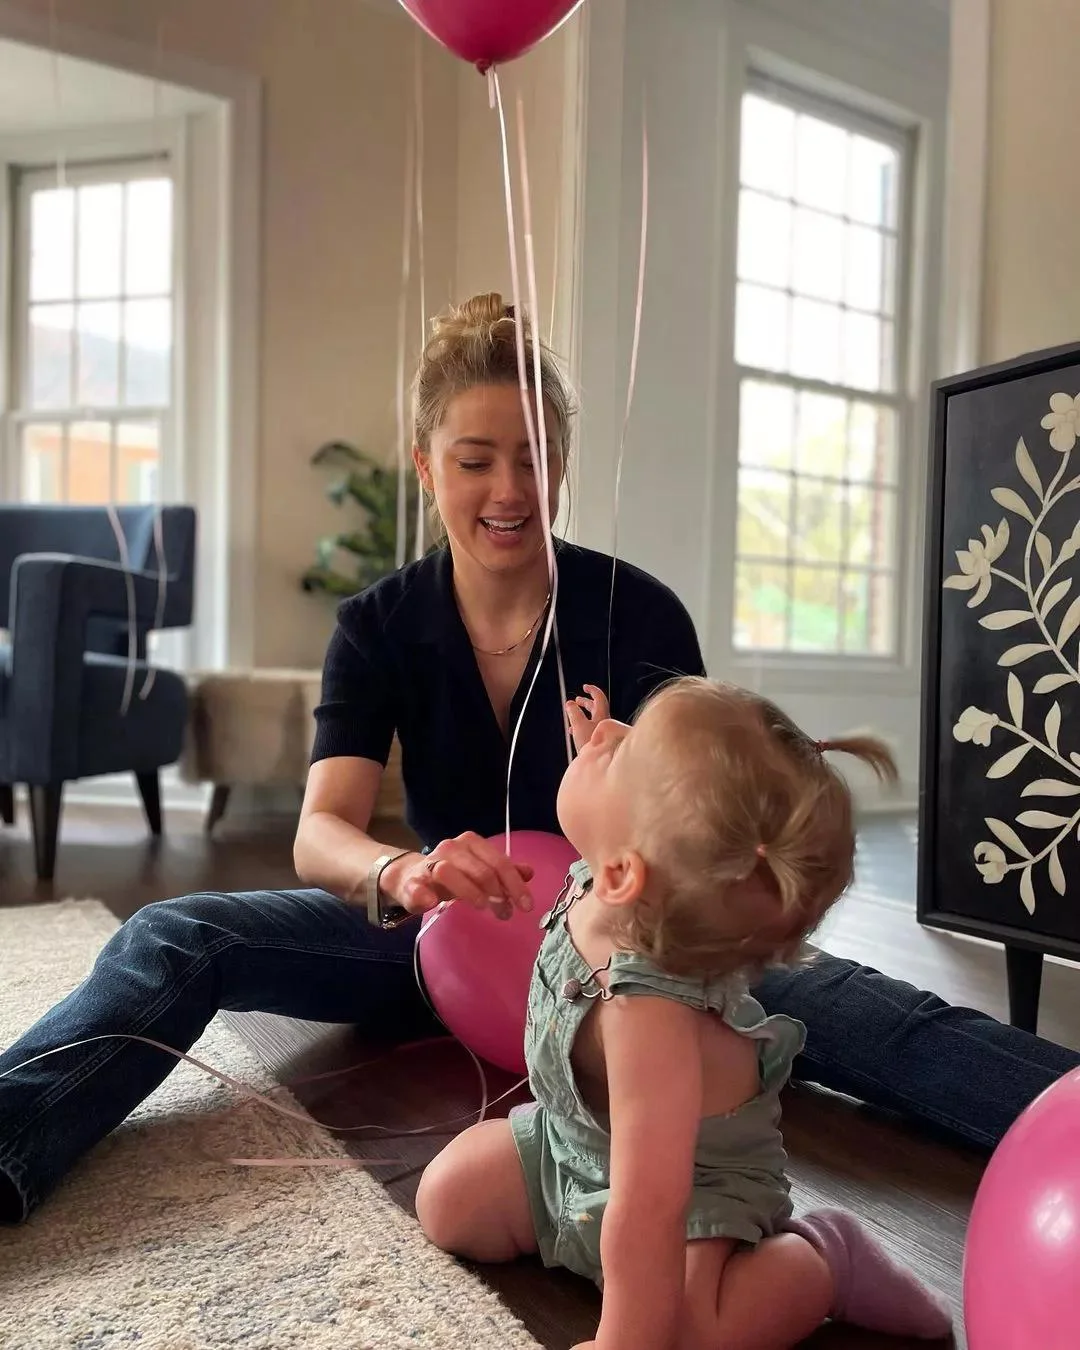 How Amber Heard Masters the Art of Being a Hollywood Mom While Filming "In the Fire"